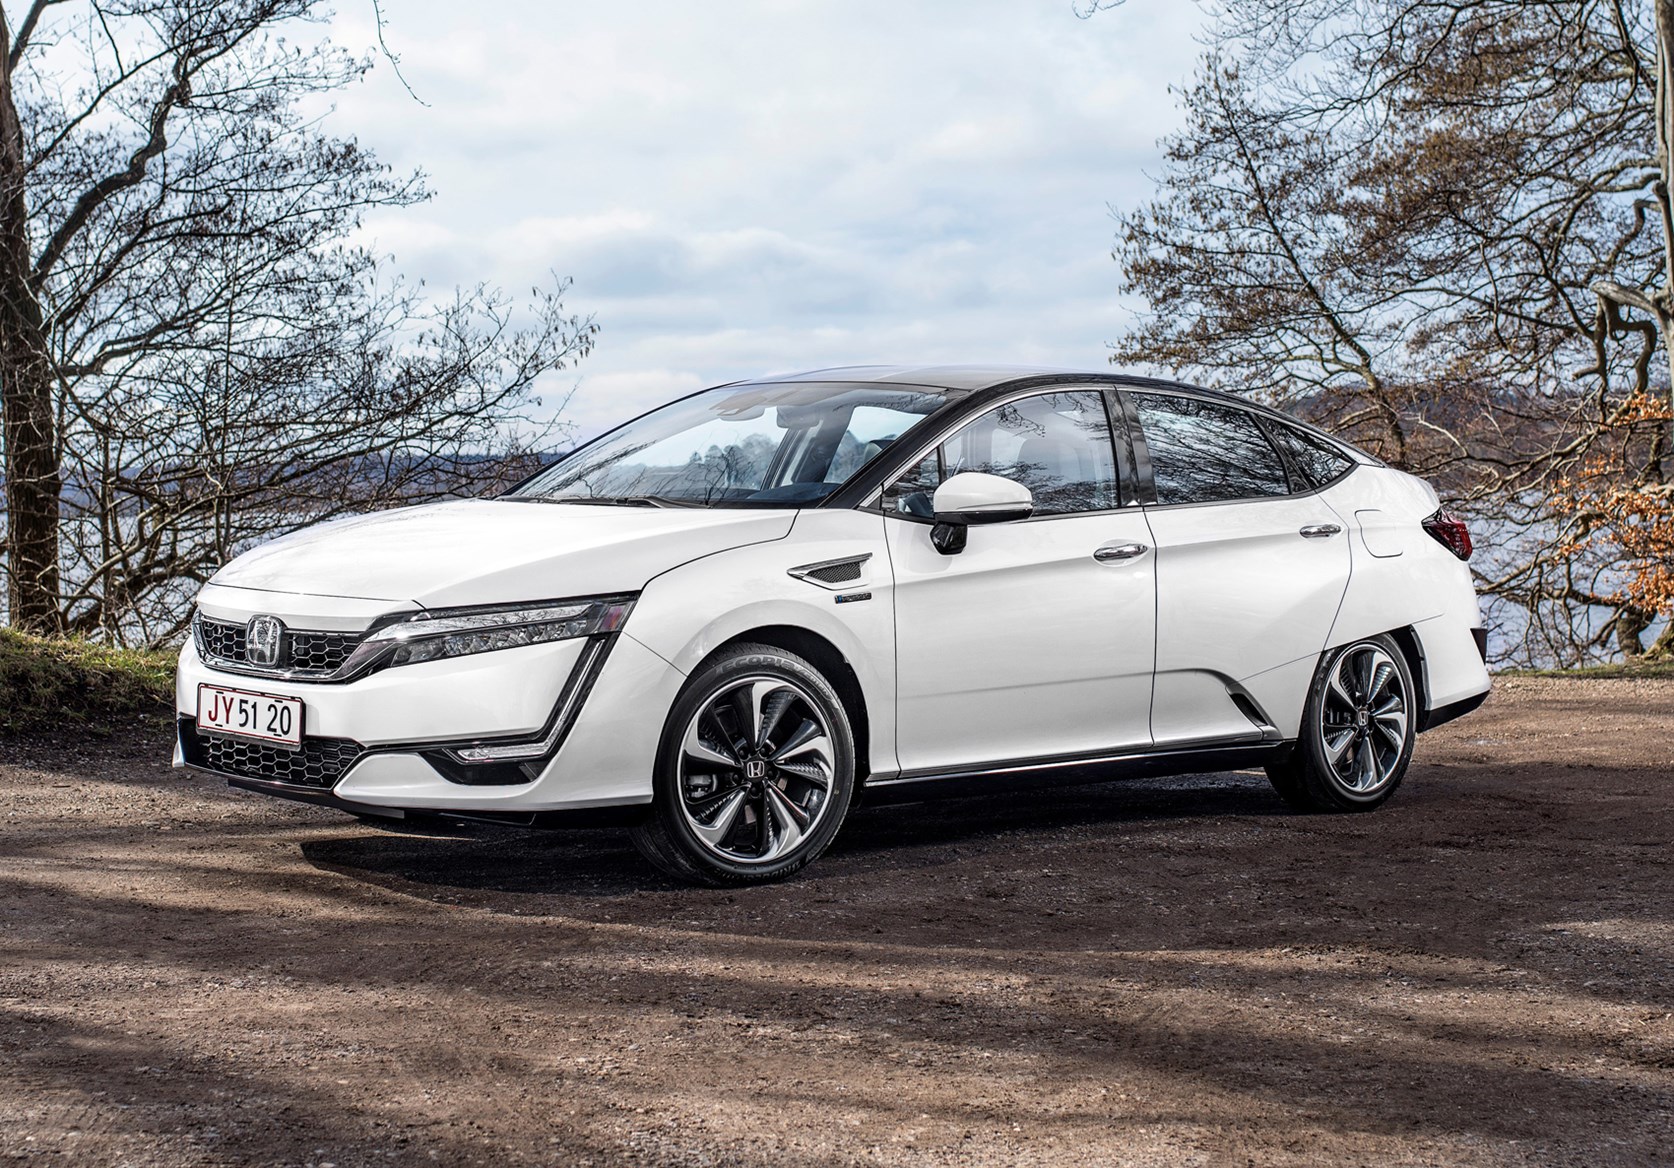 honda-clarity-saloon-review-parkers